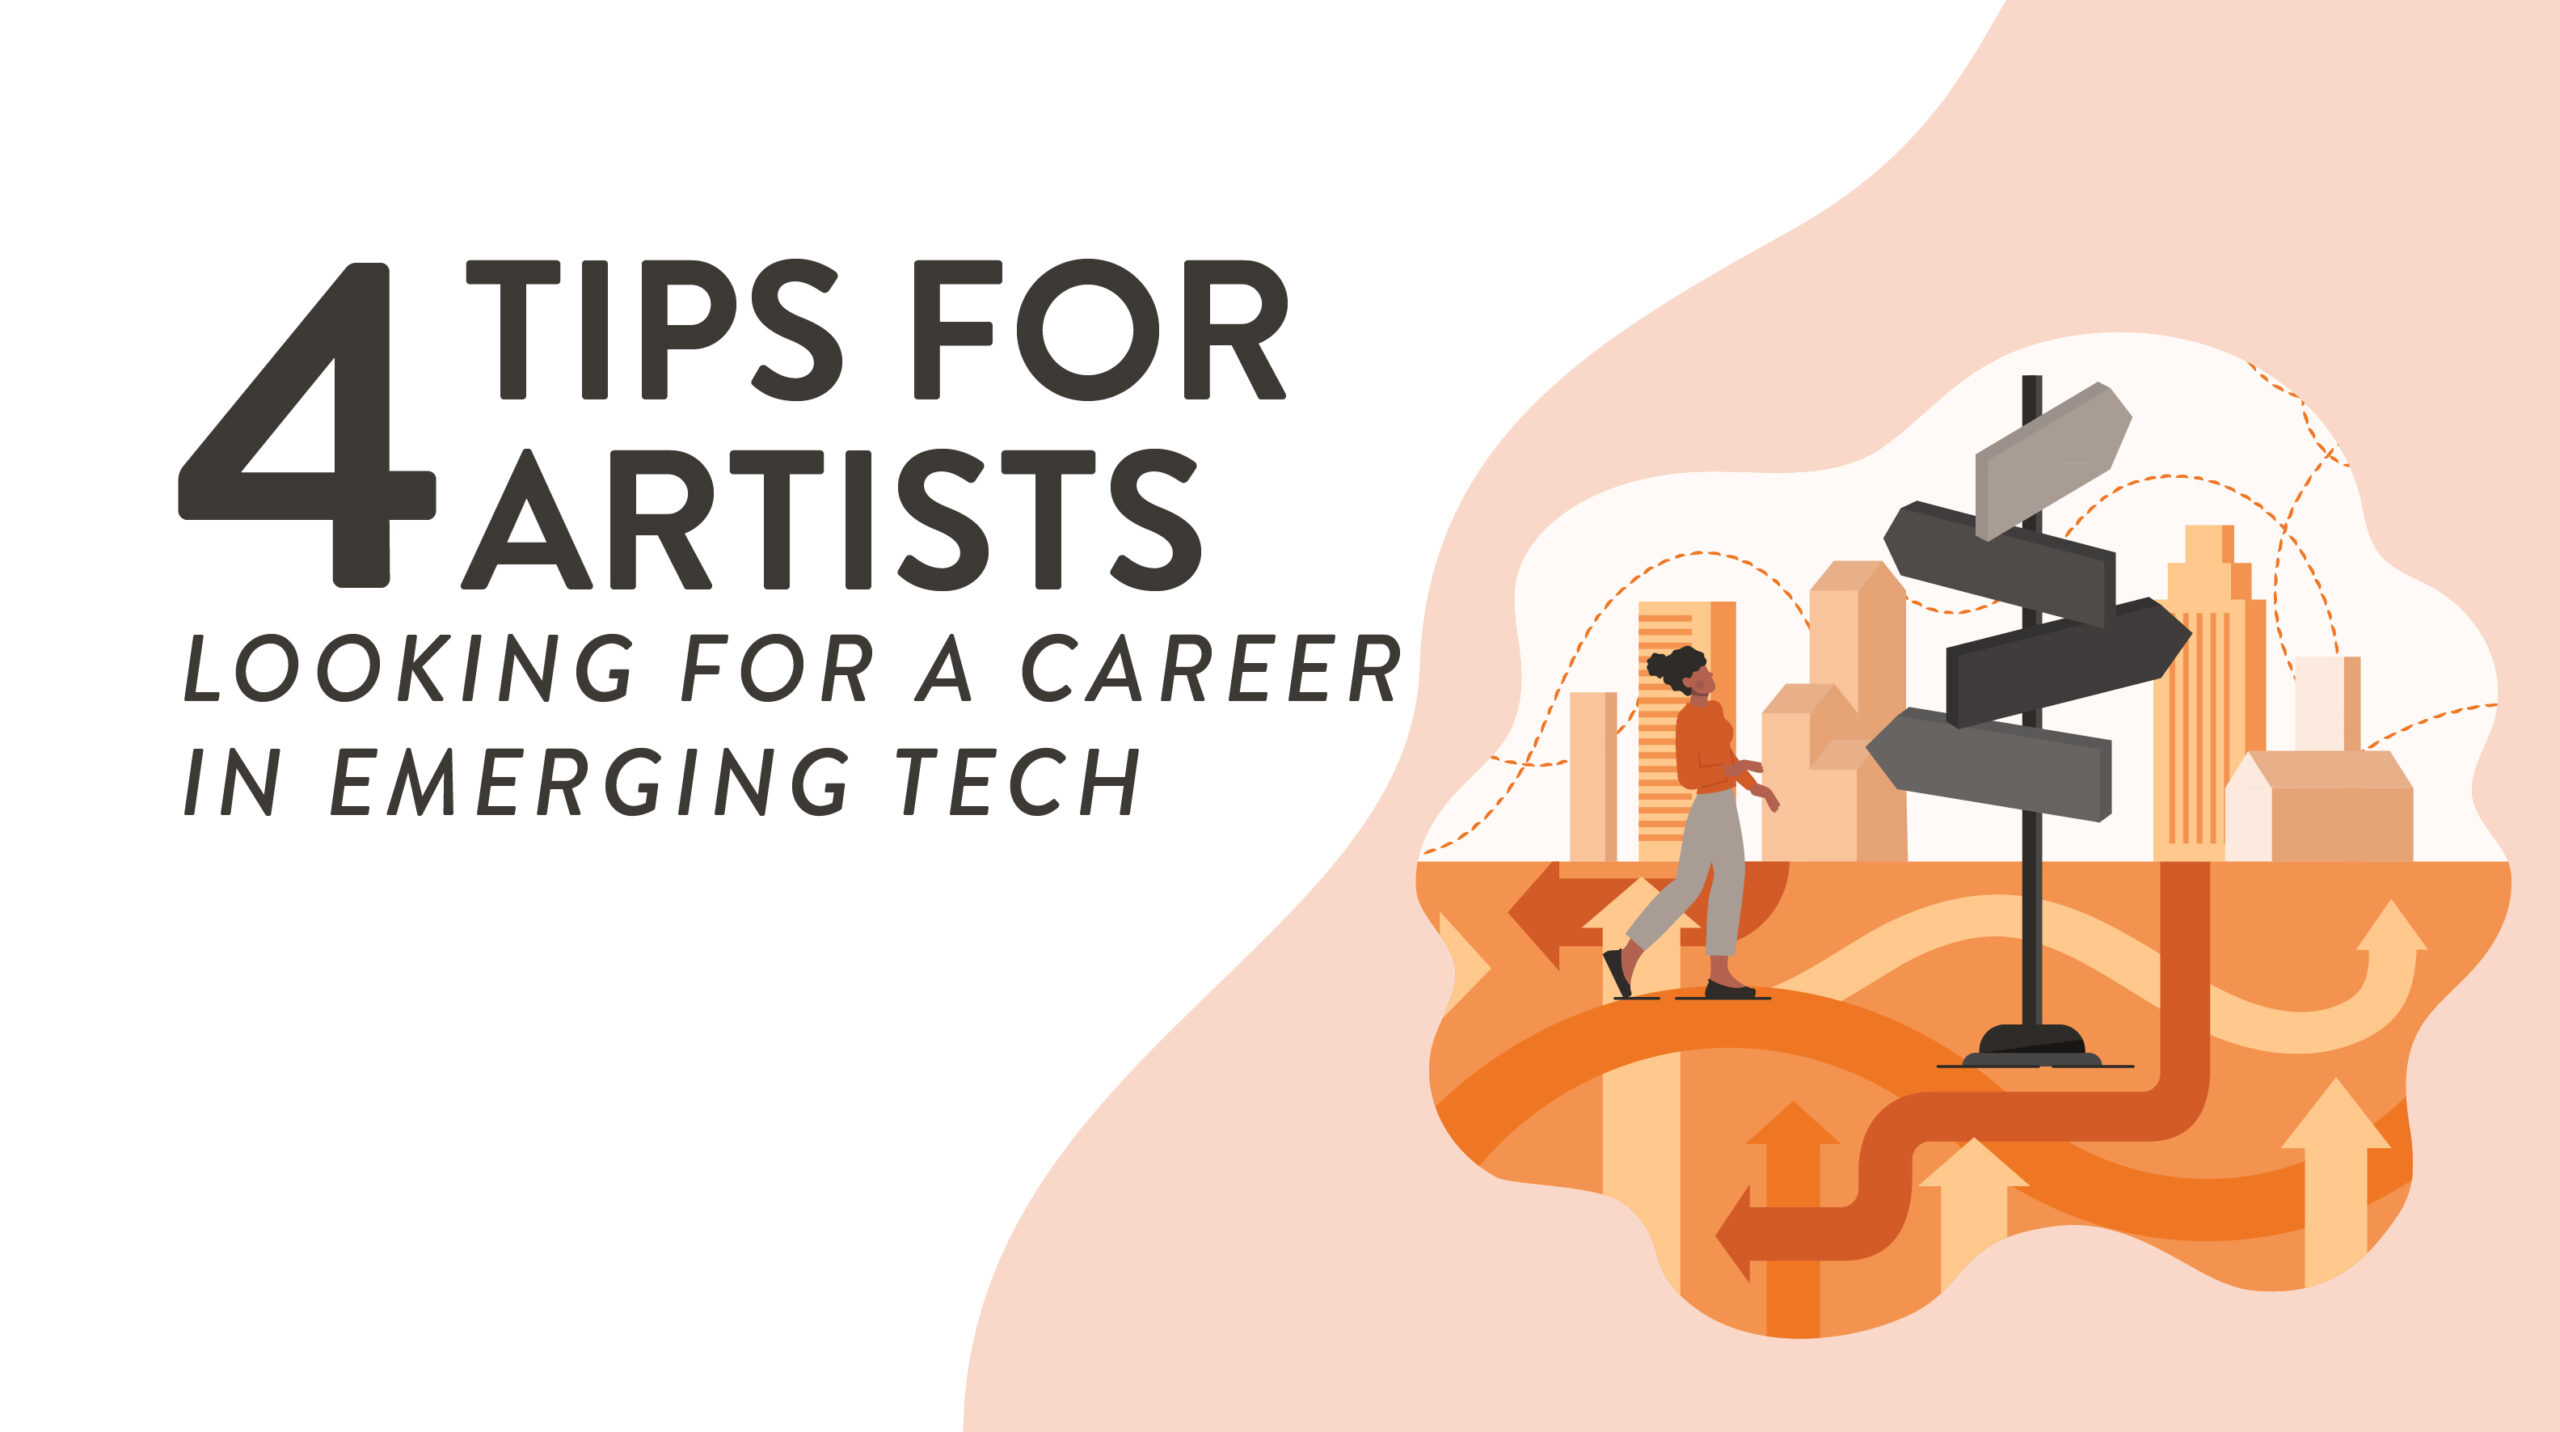 4 Tips for Artists Looking for a Career In Emerging Tech